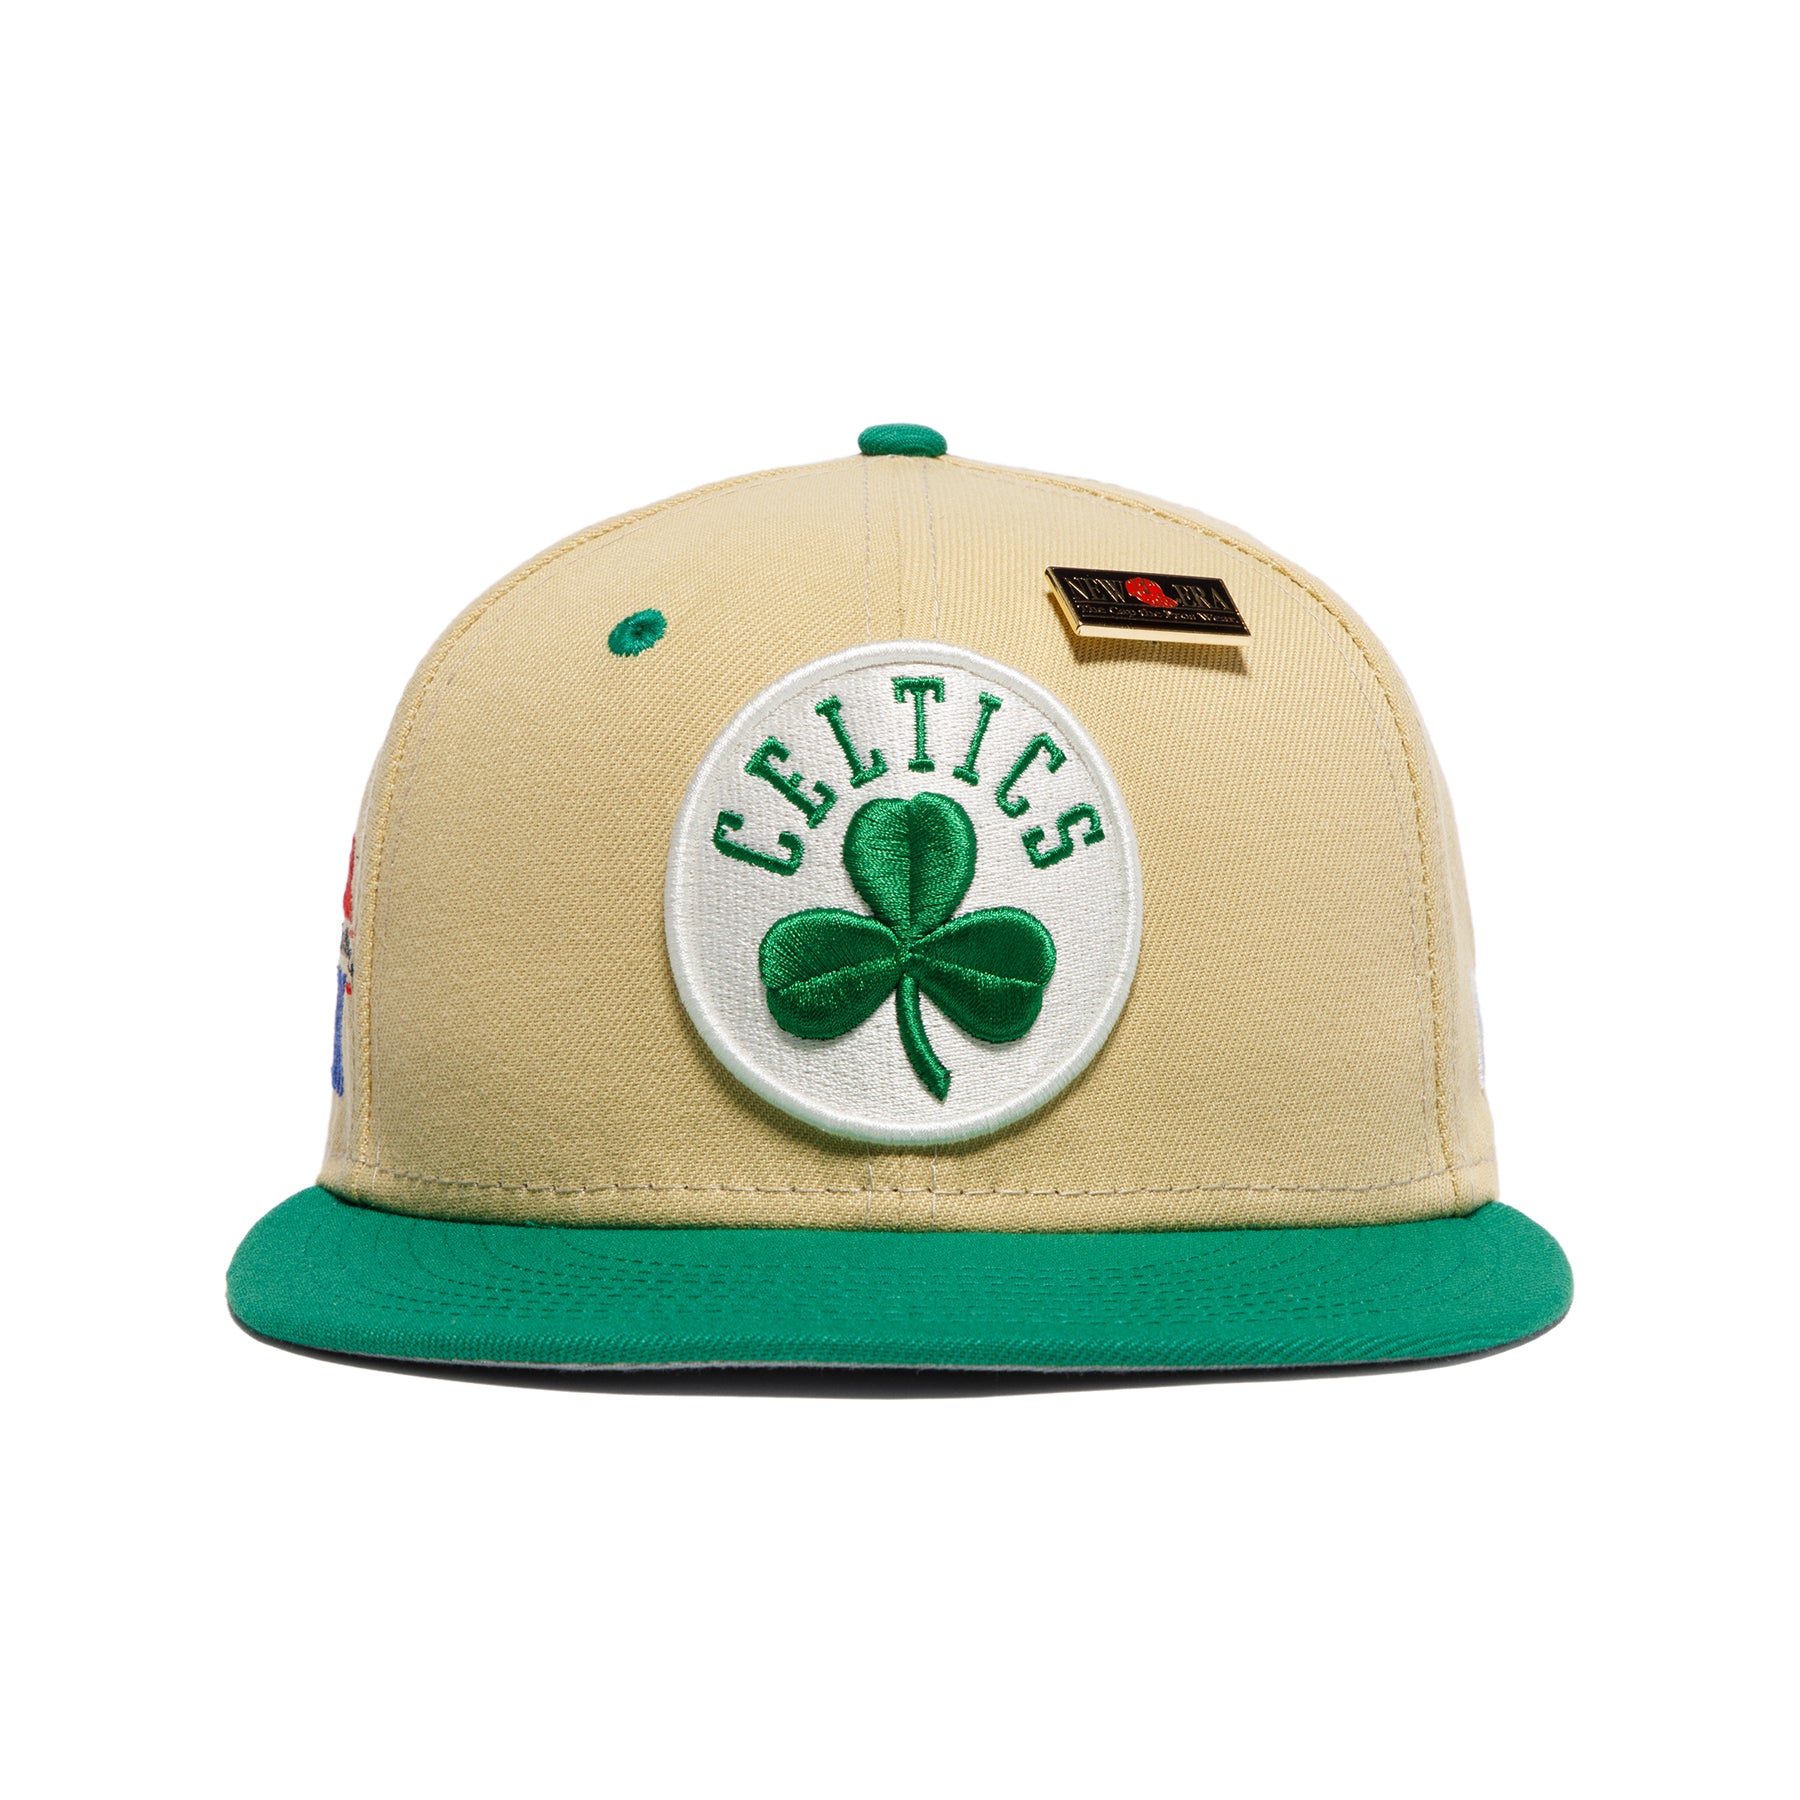 New Era Boston Celtics 59FIFTY Fitted Hat (Vintage Green) 7